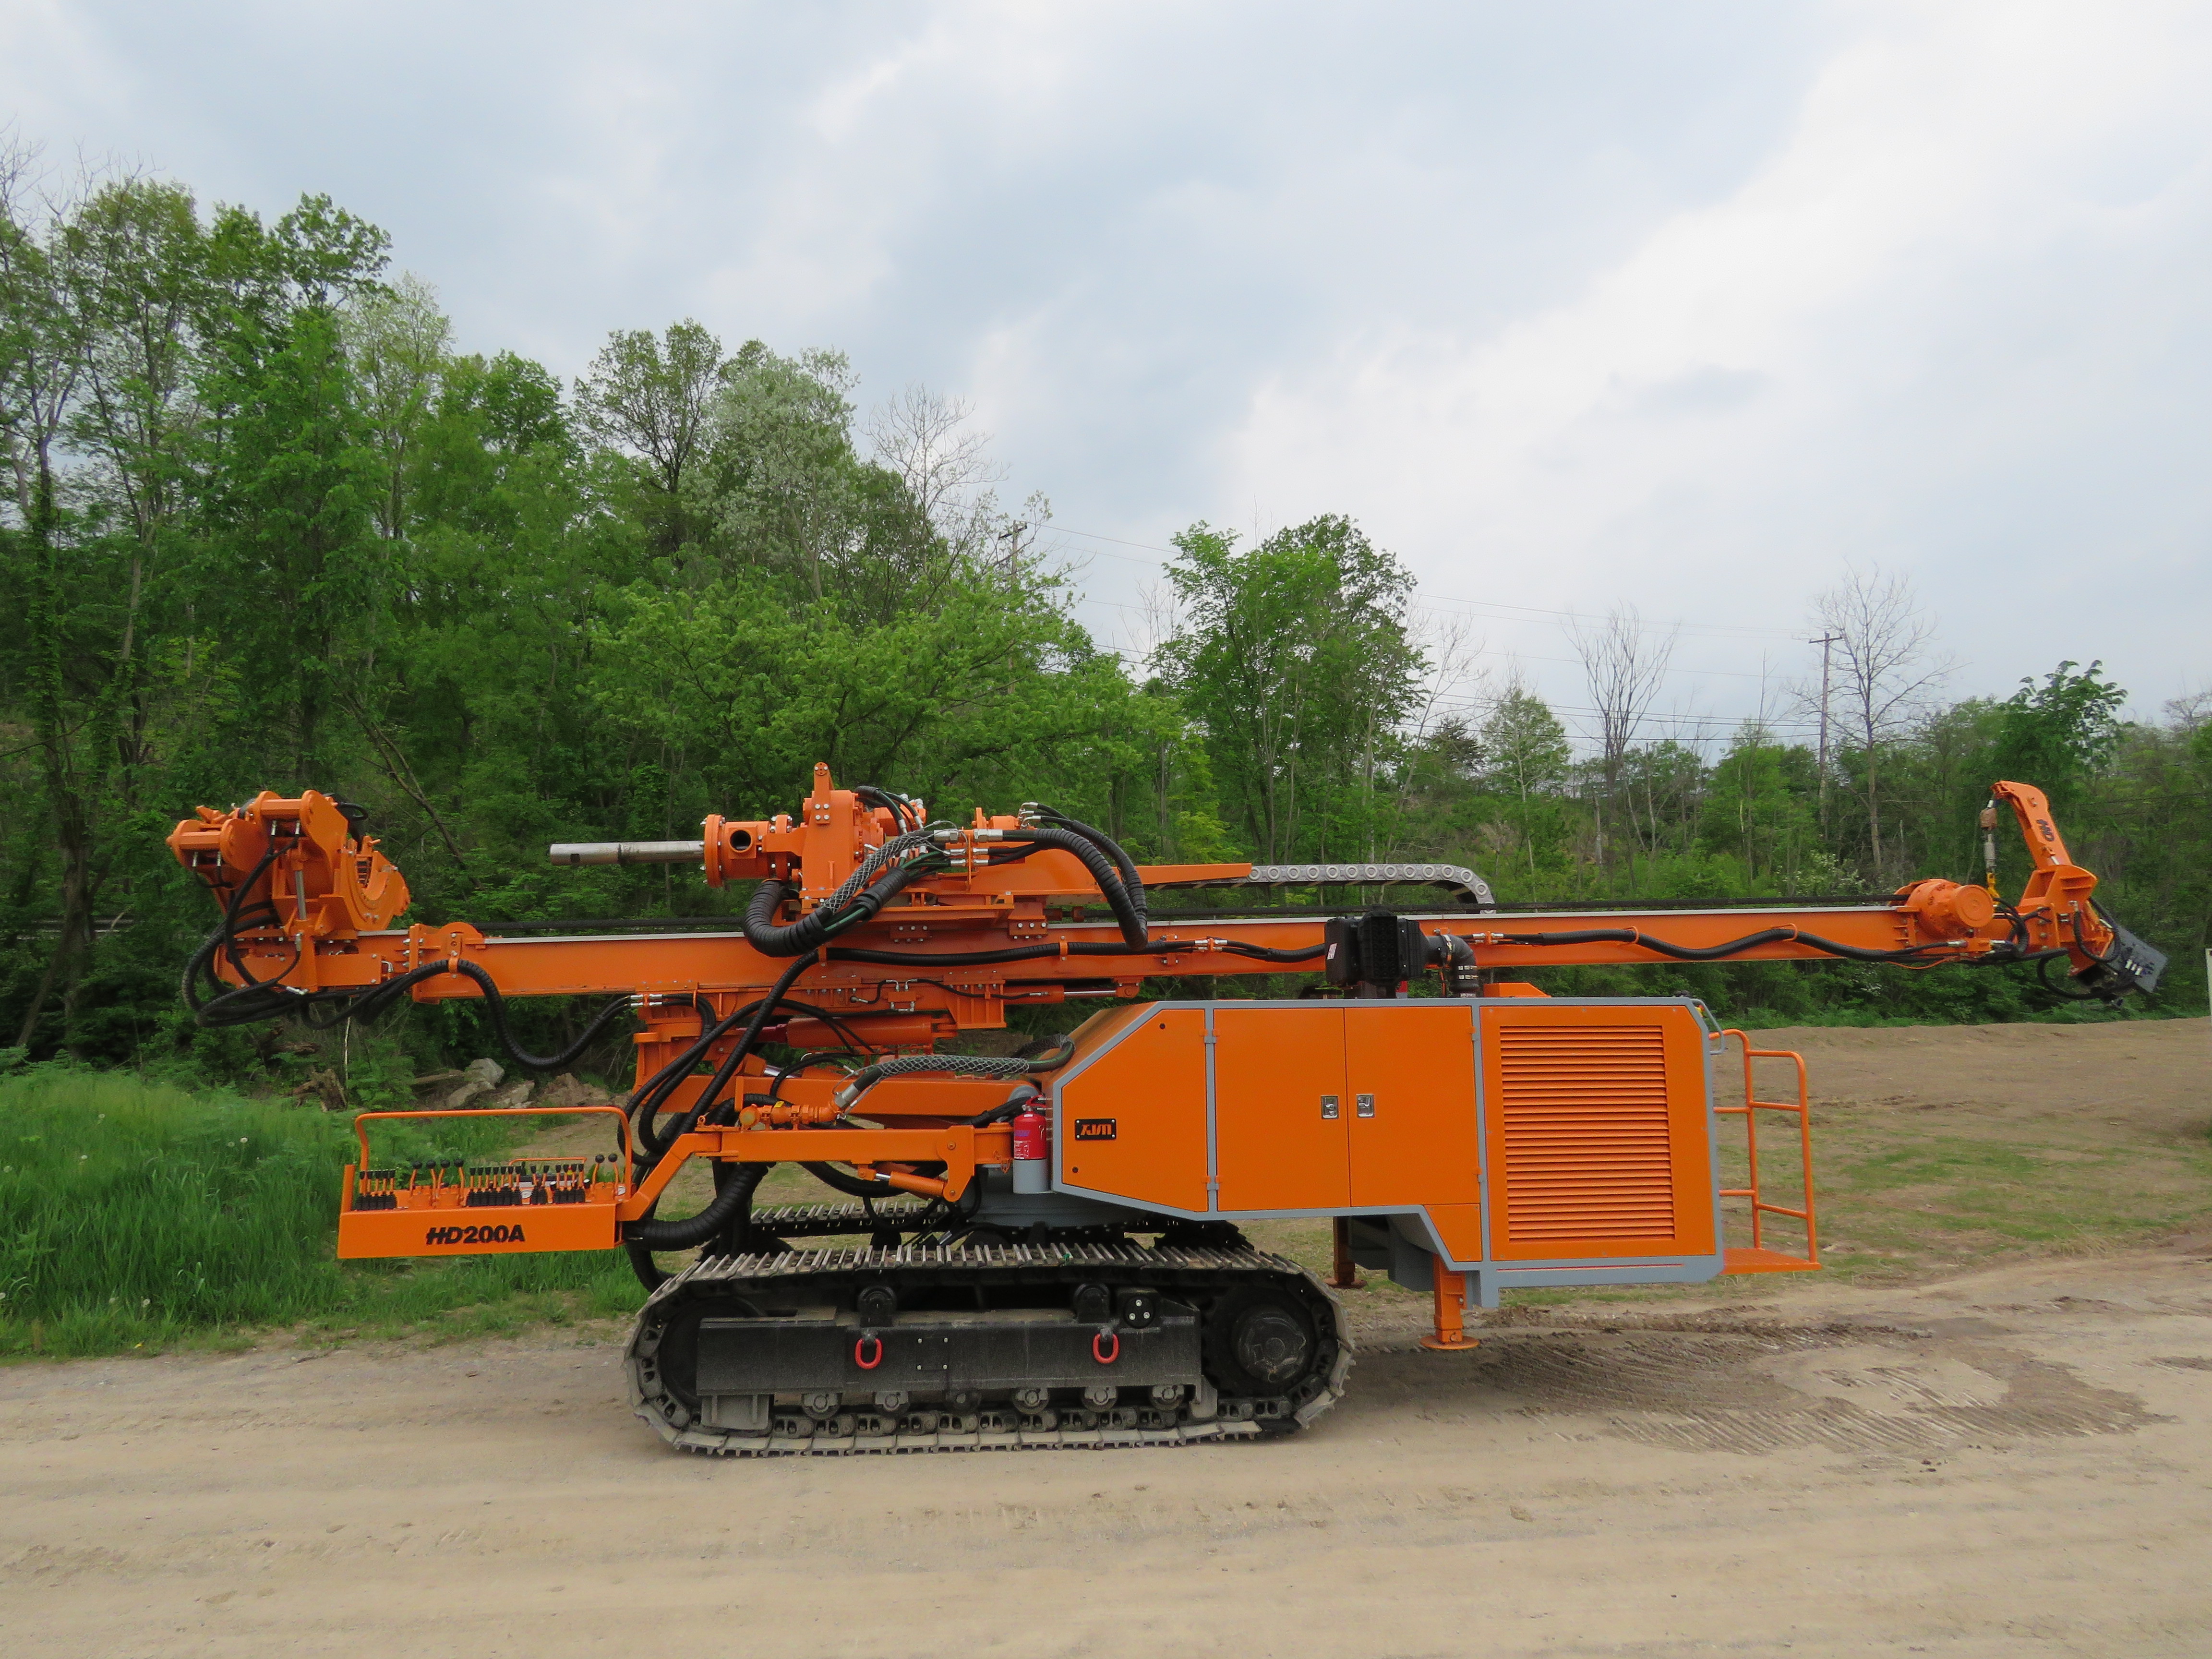 HD200A – TJM Drilling Equipment and Supplies Beaver County, PA